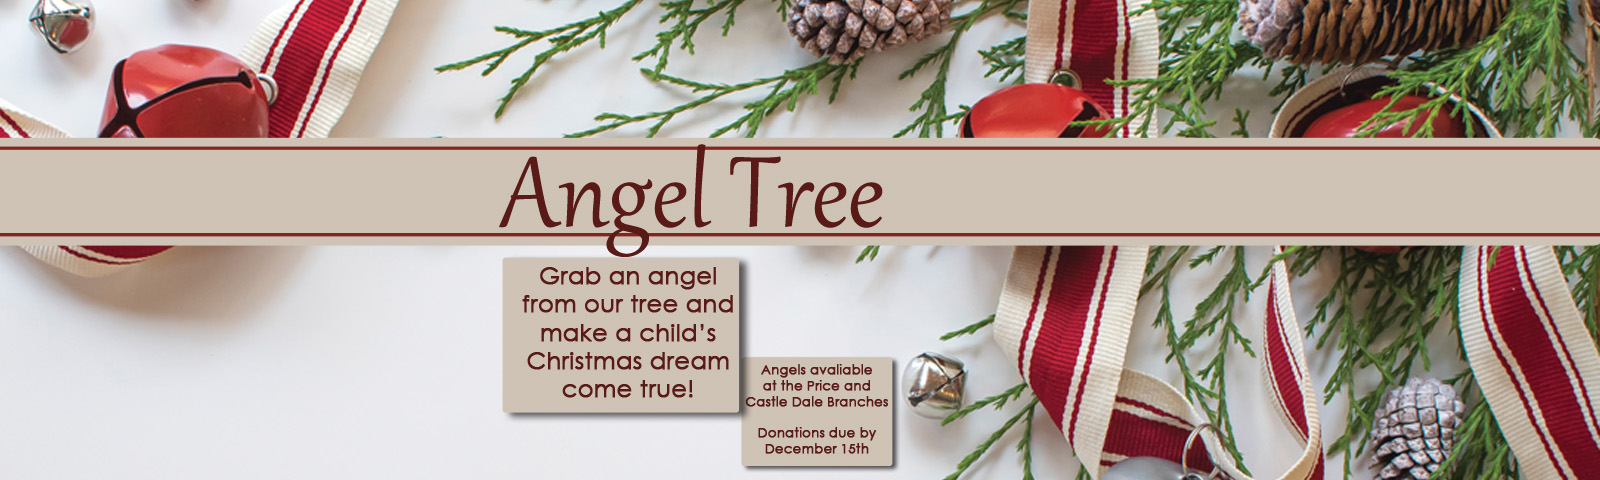 Angel Tree: Grab an angel from our tree and make a child's Christmas dream come true! Angels are avaliable at the Price and Castle Dale Branches. Donations due by December 15th.